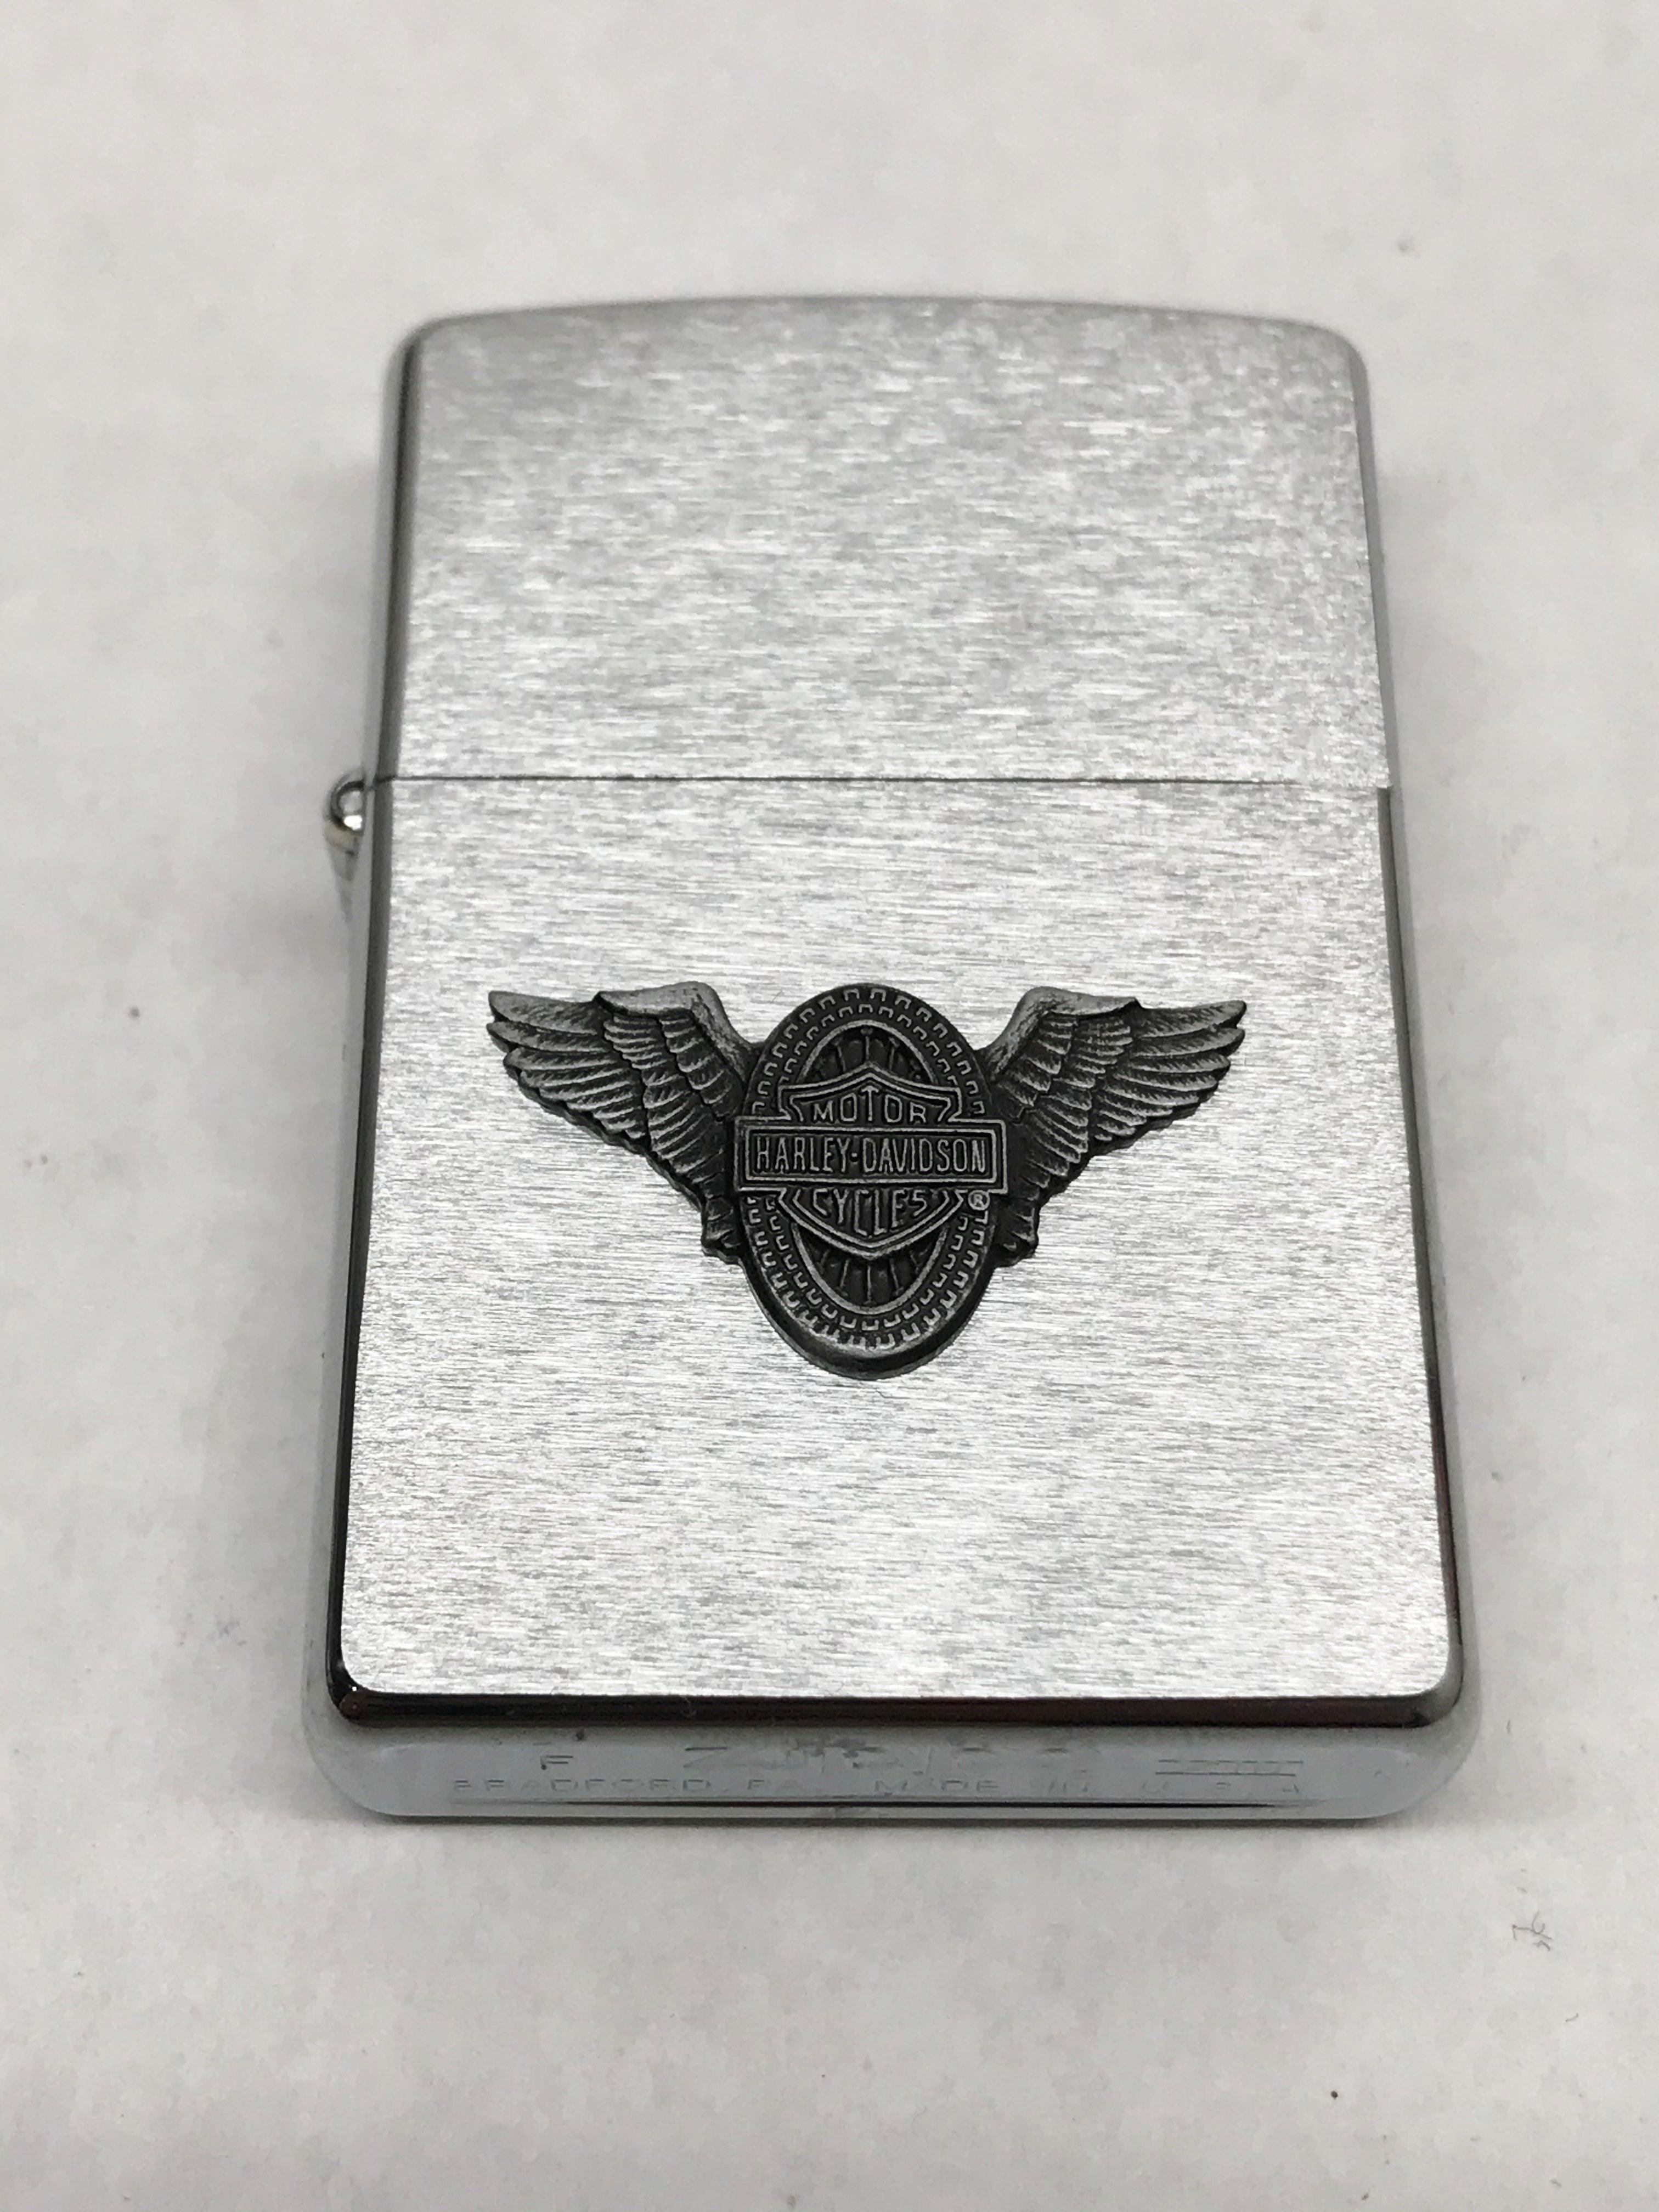 New 1997 XIII Harley Davidson Oval Wing Zippo Lighter And Keychain Set